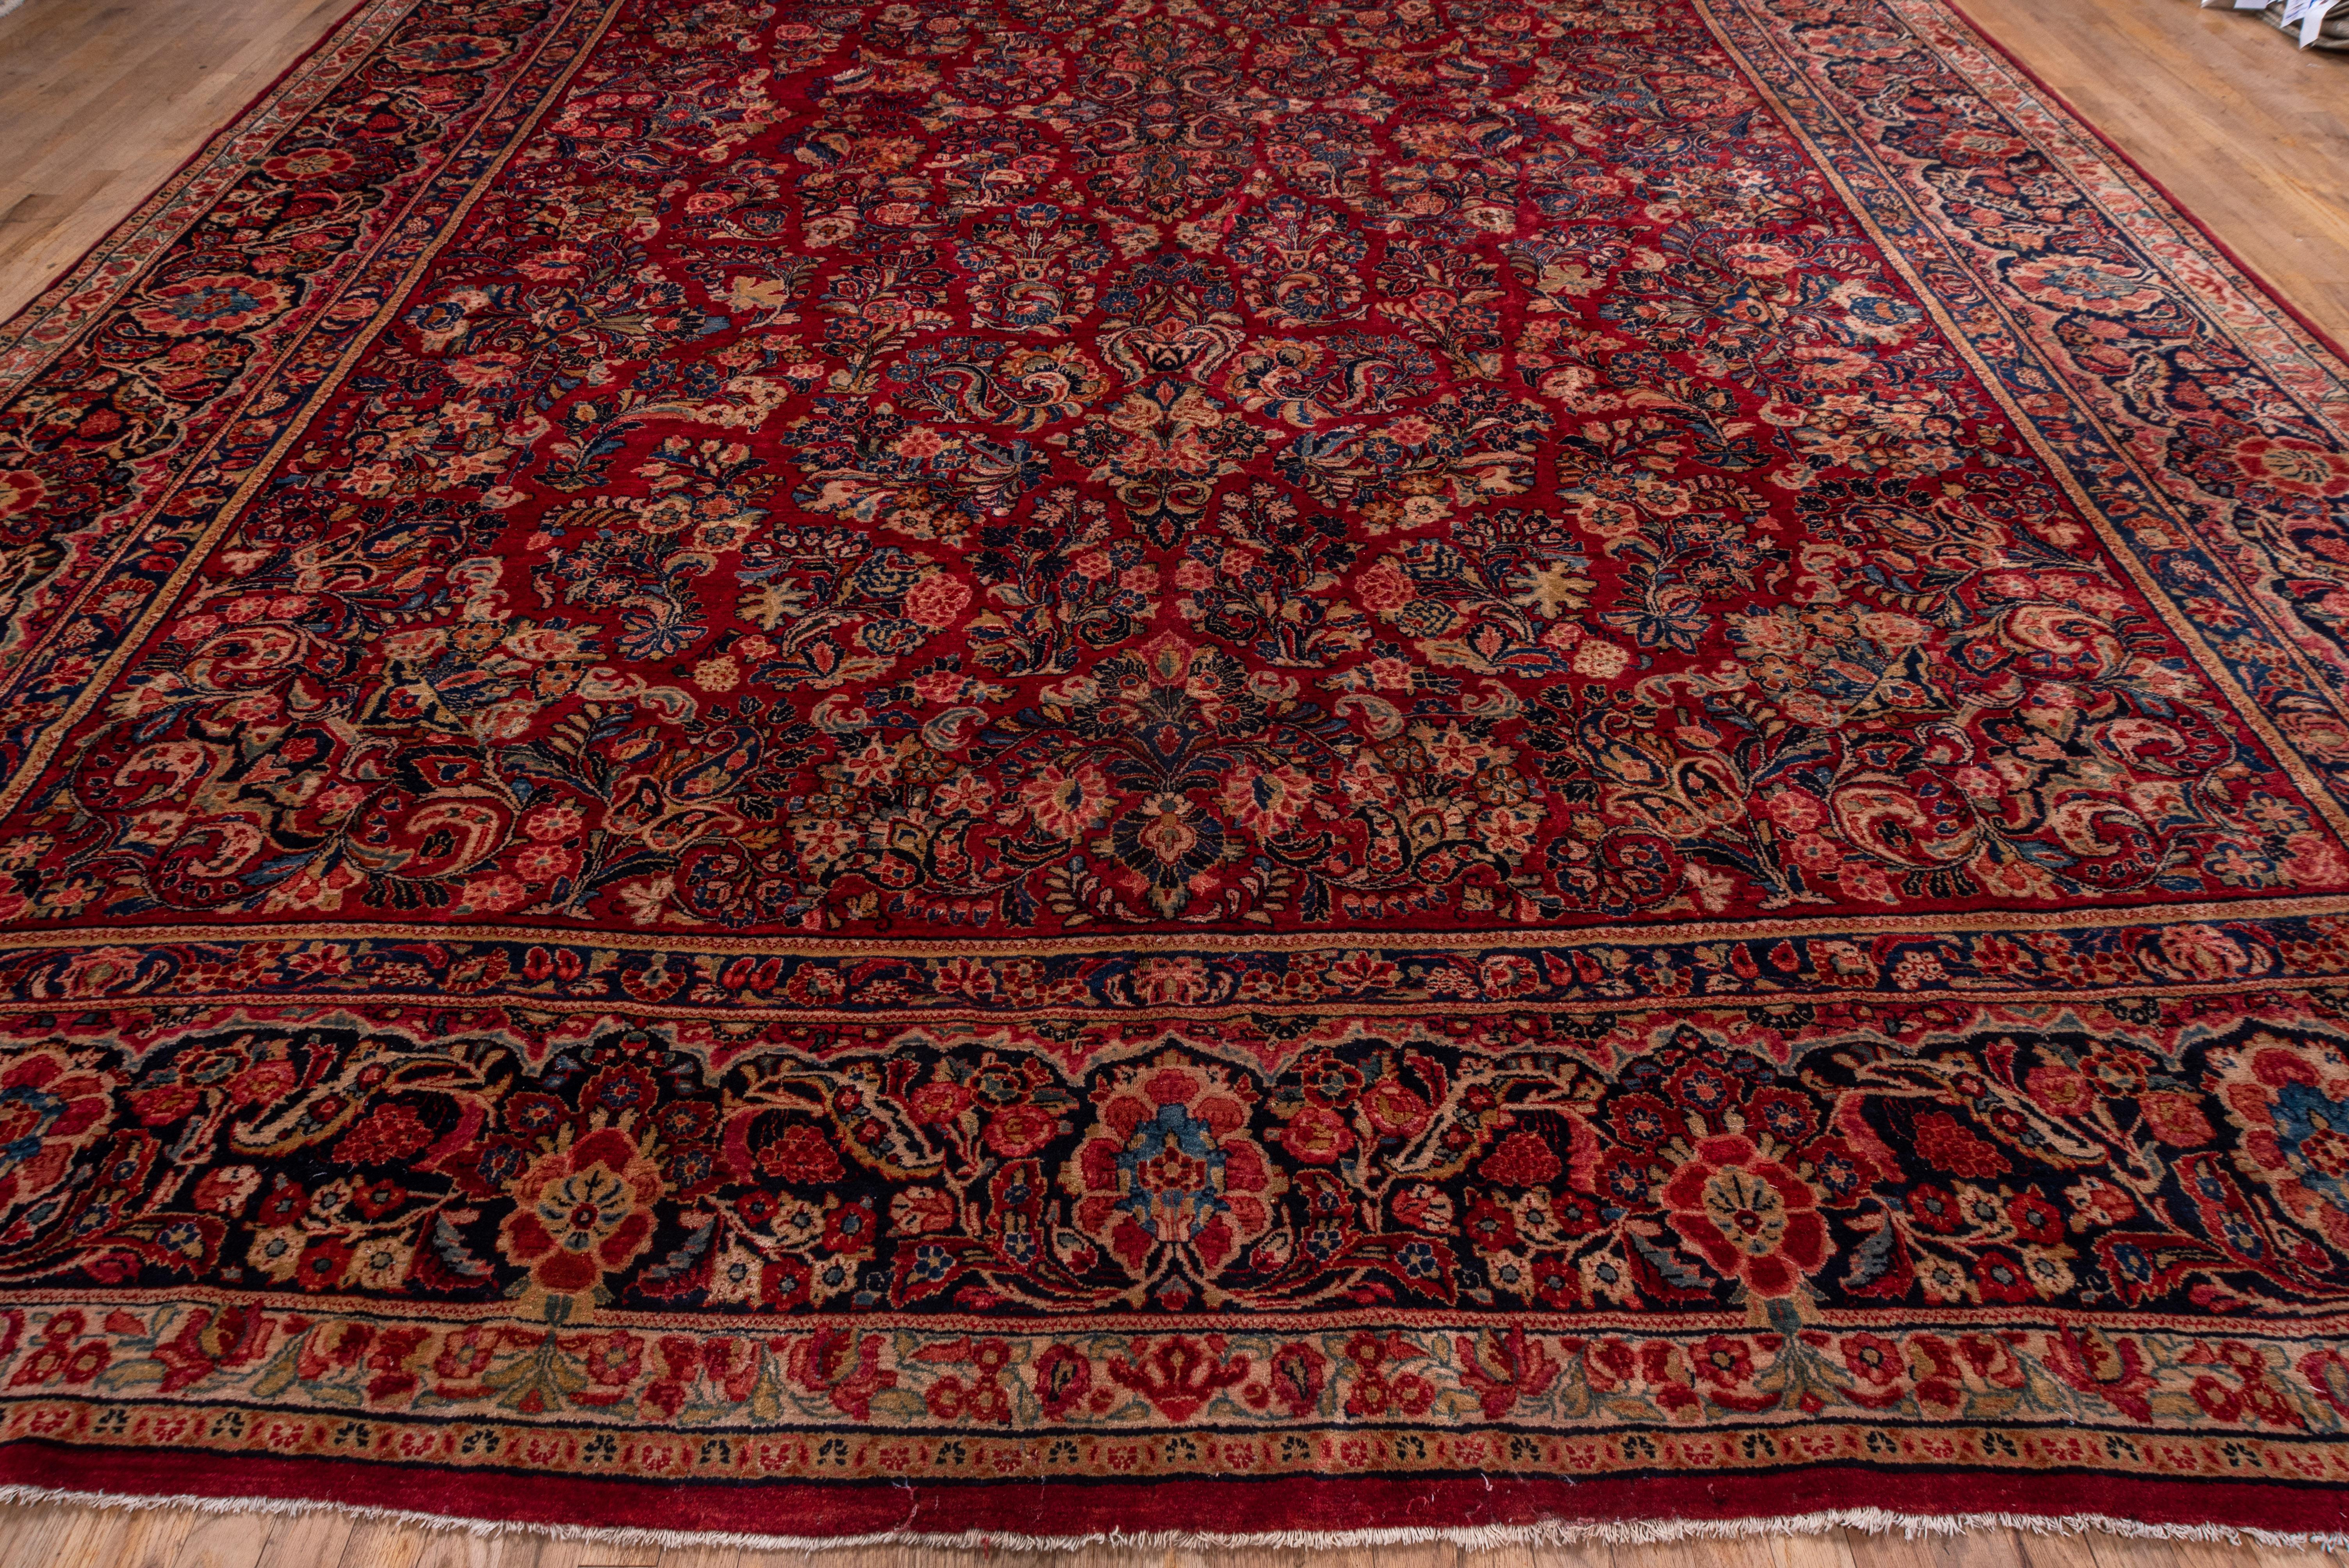 Antique Red Persian Sarouk Rug, All-Over Field, Silky Pile In Good Condition For Sale In New York, NY